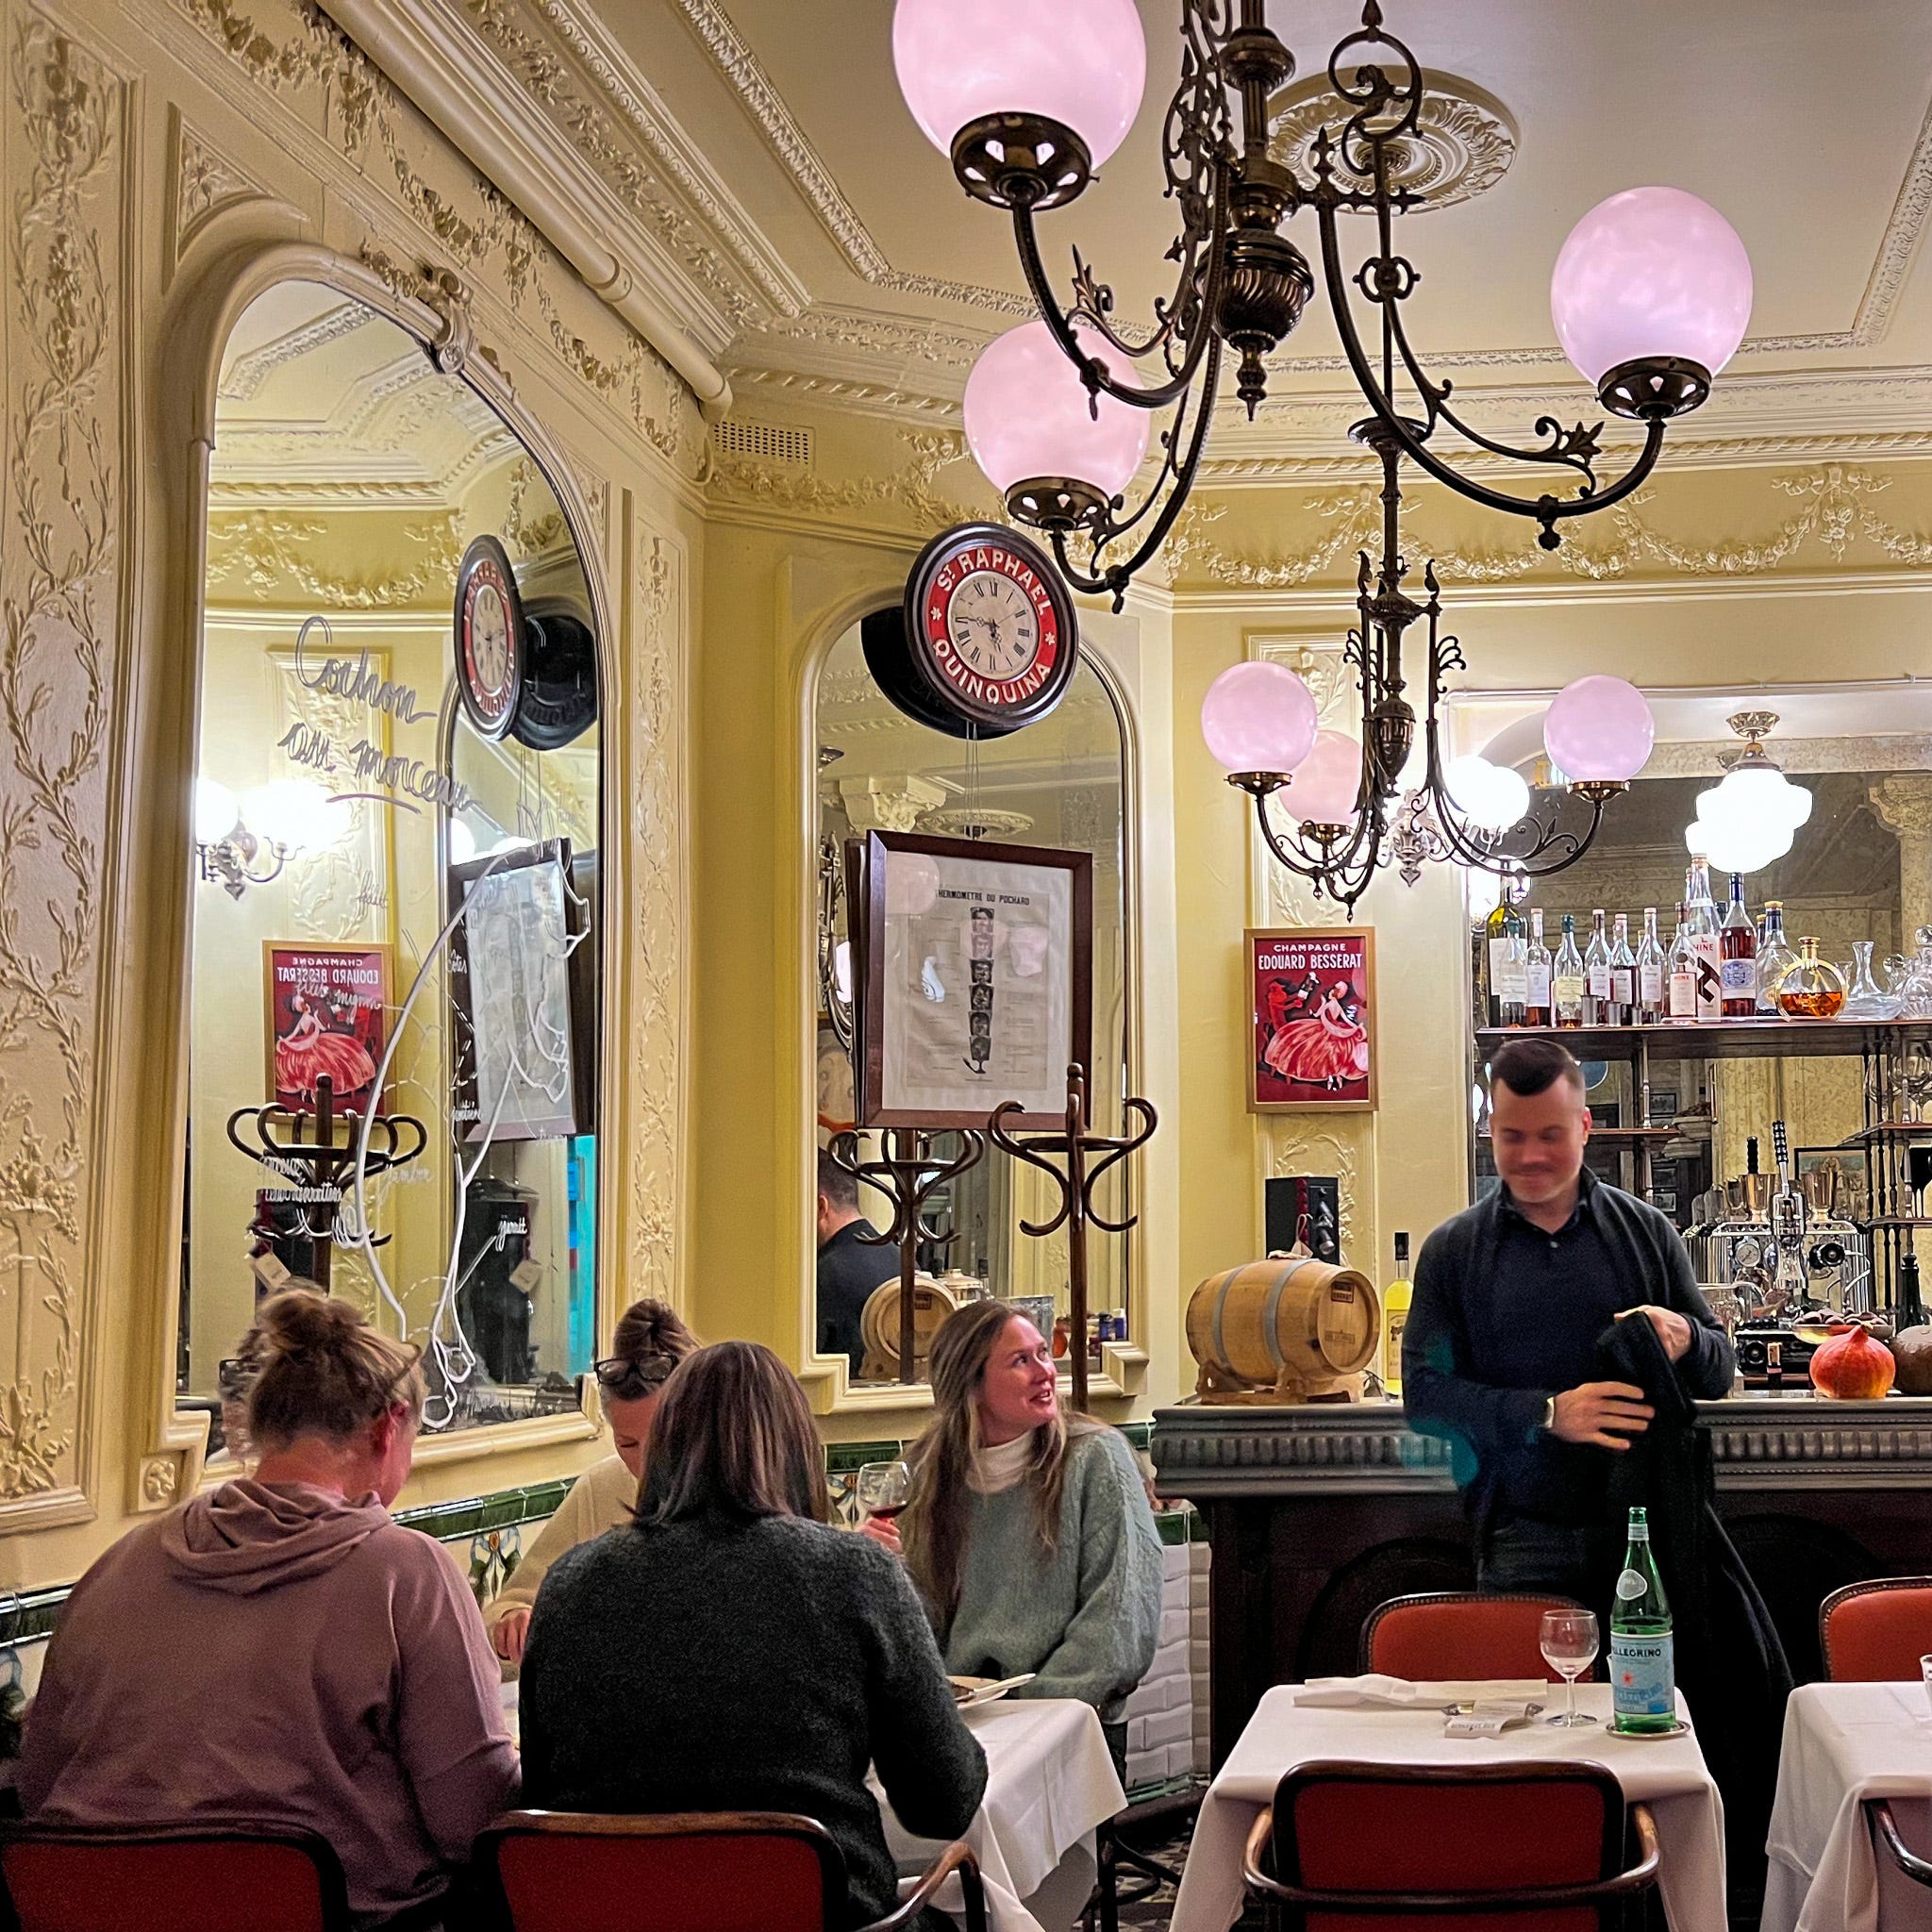 Where to eat on Sunday in Paris - by Meg Zimbeck